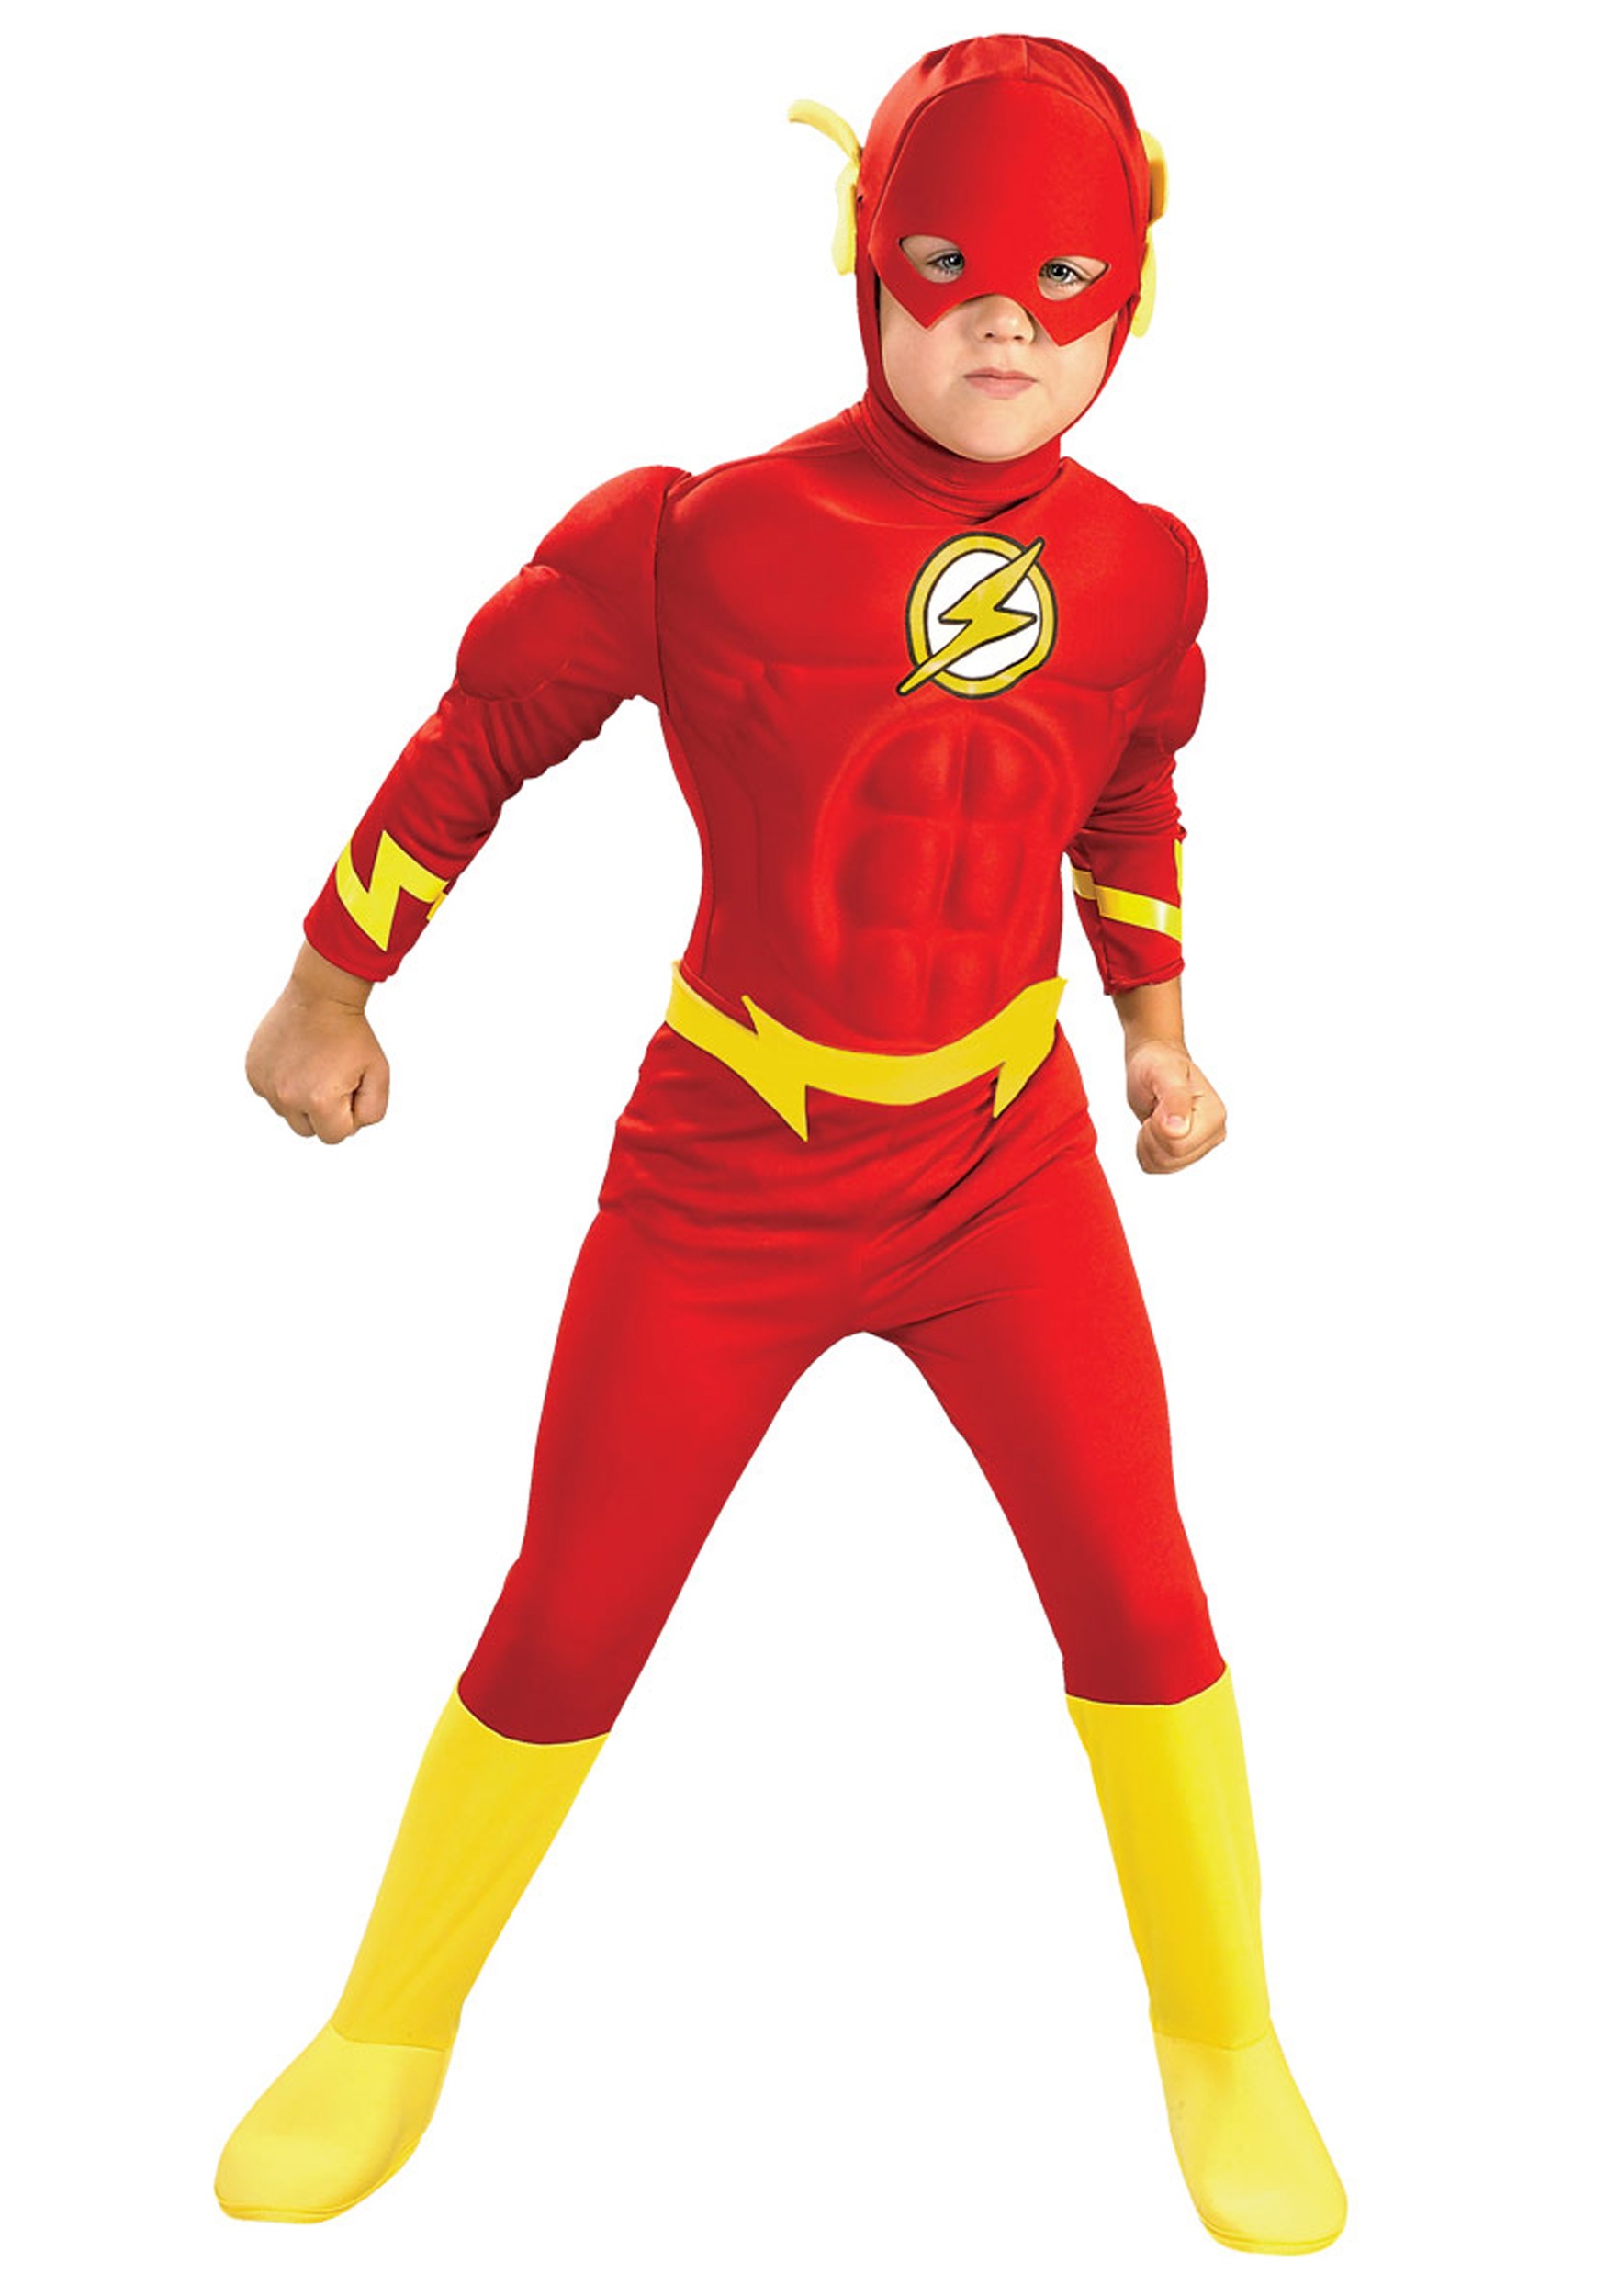 Photos - Fancy Dress Rubies Costume Co. Inc Deluxe Muscle Chest Flash Kid's Costume Red/Yel 